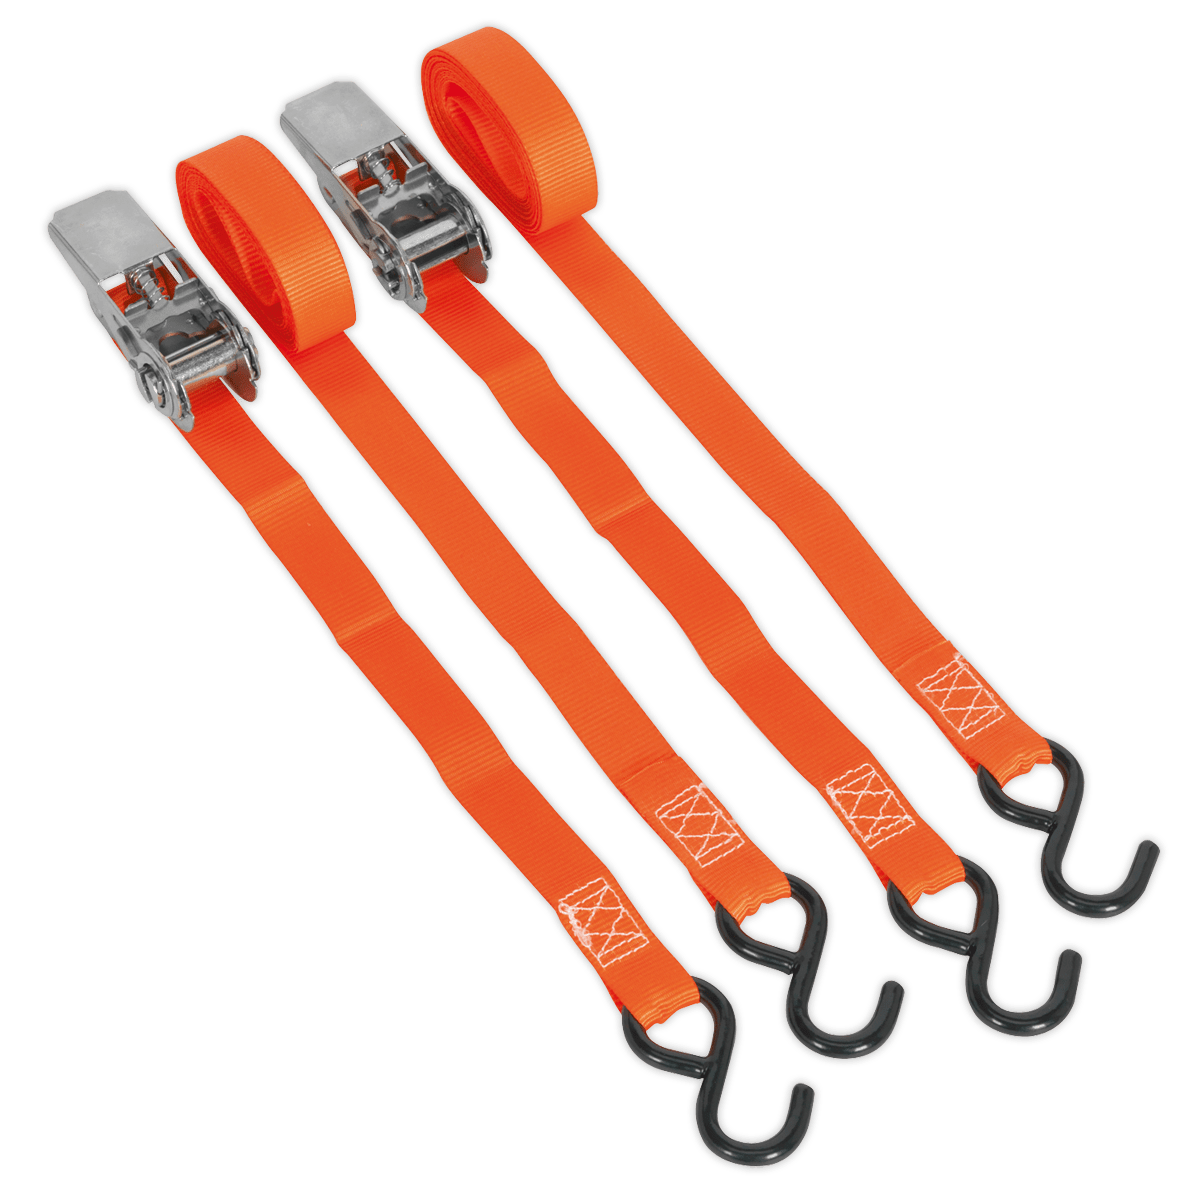 Sealey Ratchet Straps 25mm x 4m Polyester Webbing with S-Hooks 500kg Breaking Strength - Pair